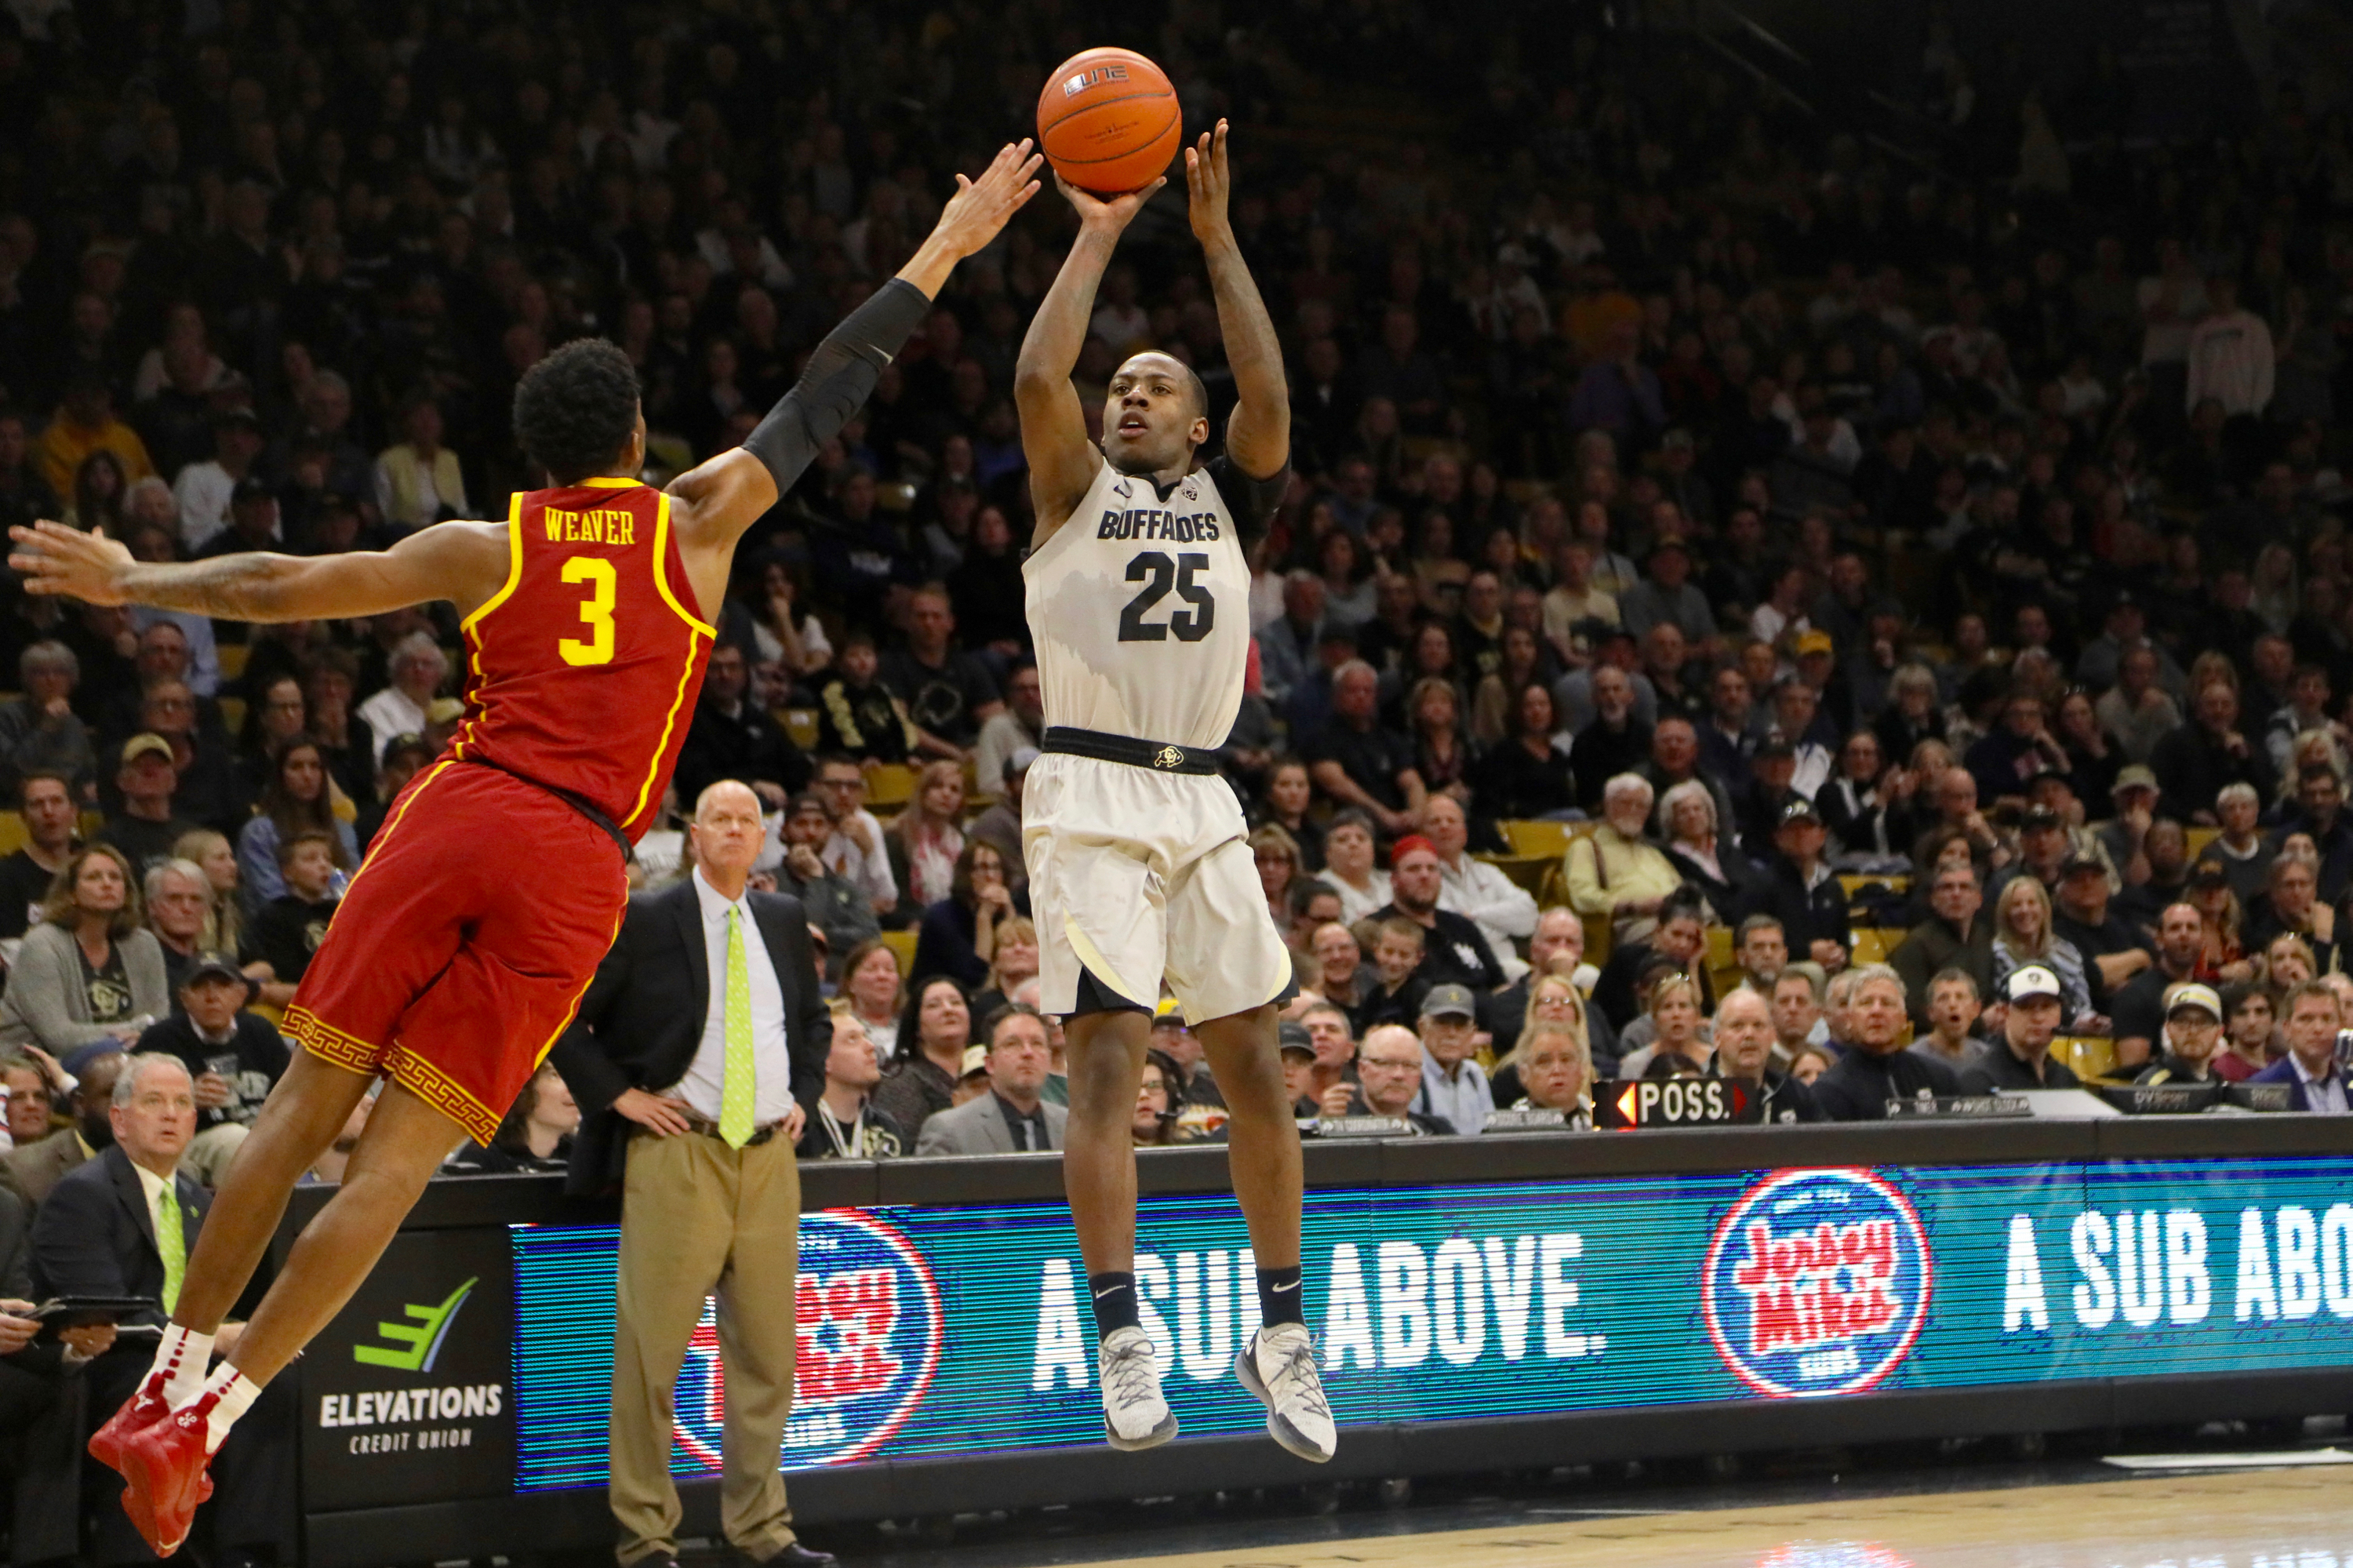 Colorado finishes regular season with 78-67 win over USC